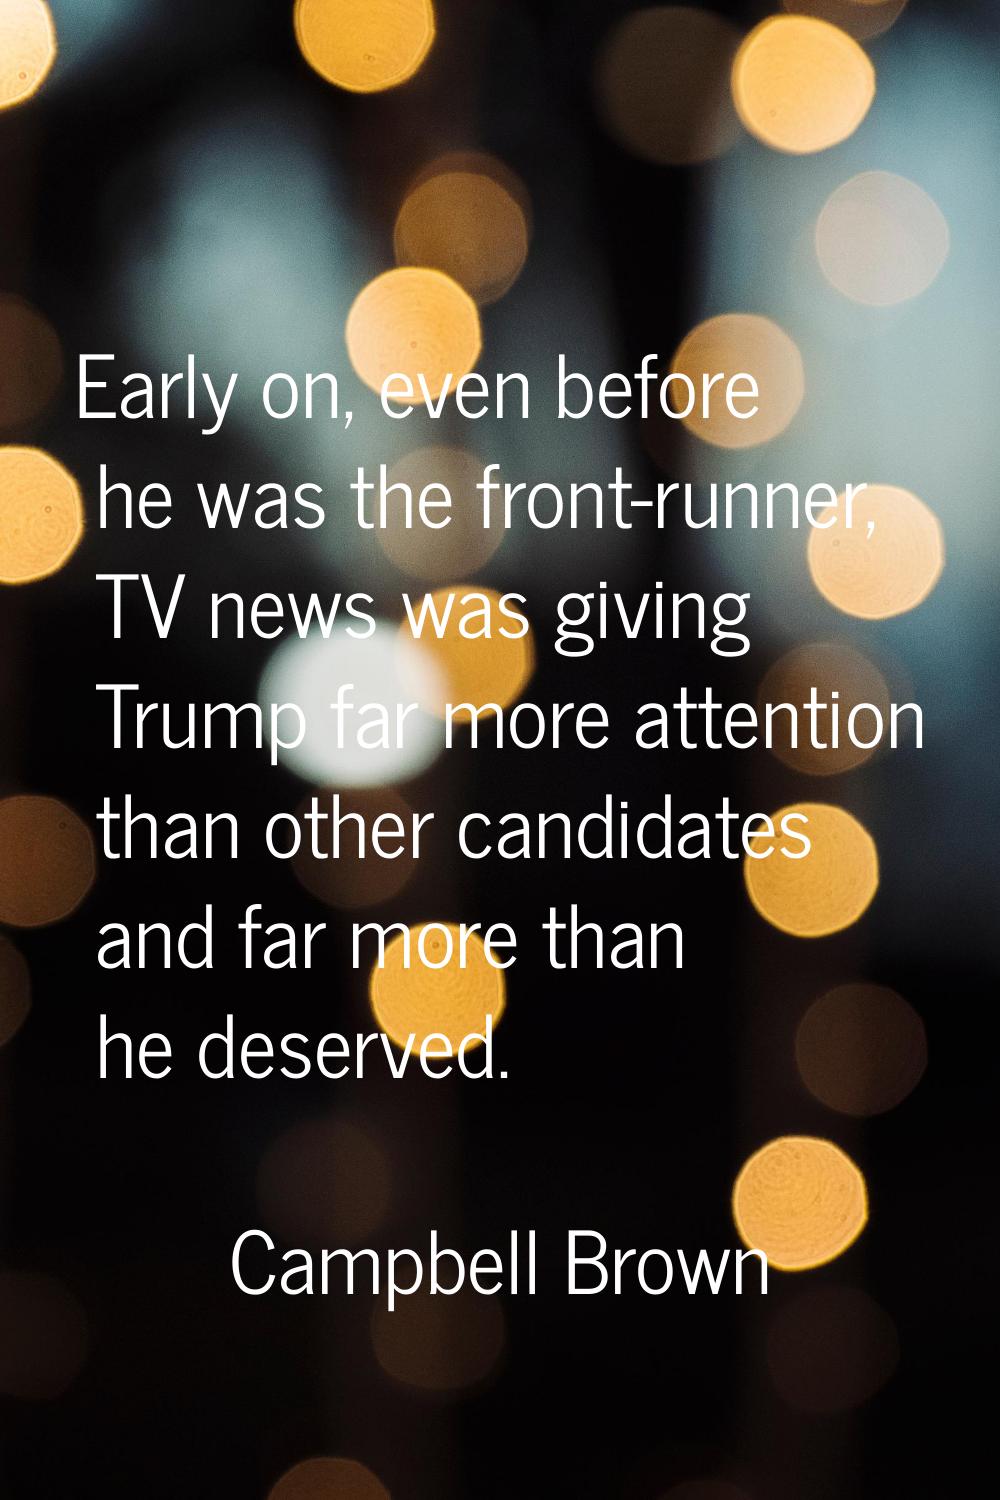 Early on, even before he was the front-runner, TV news was giving Trump far more attention than oth